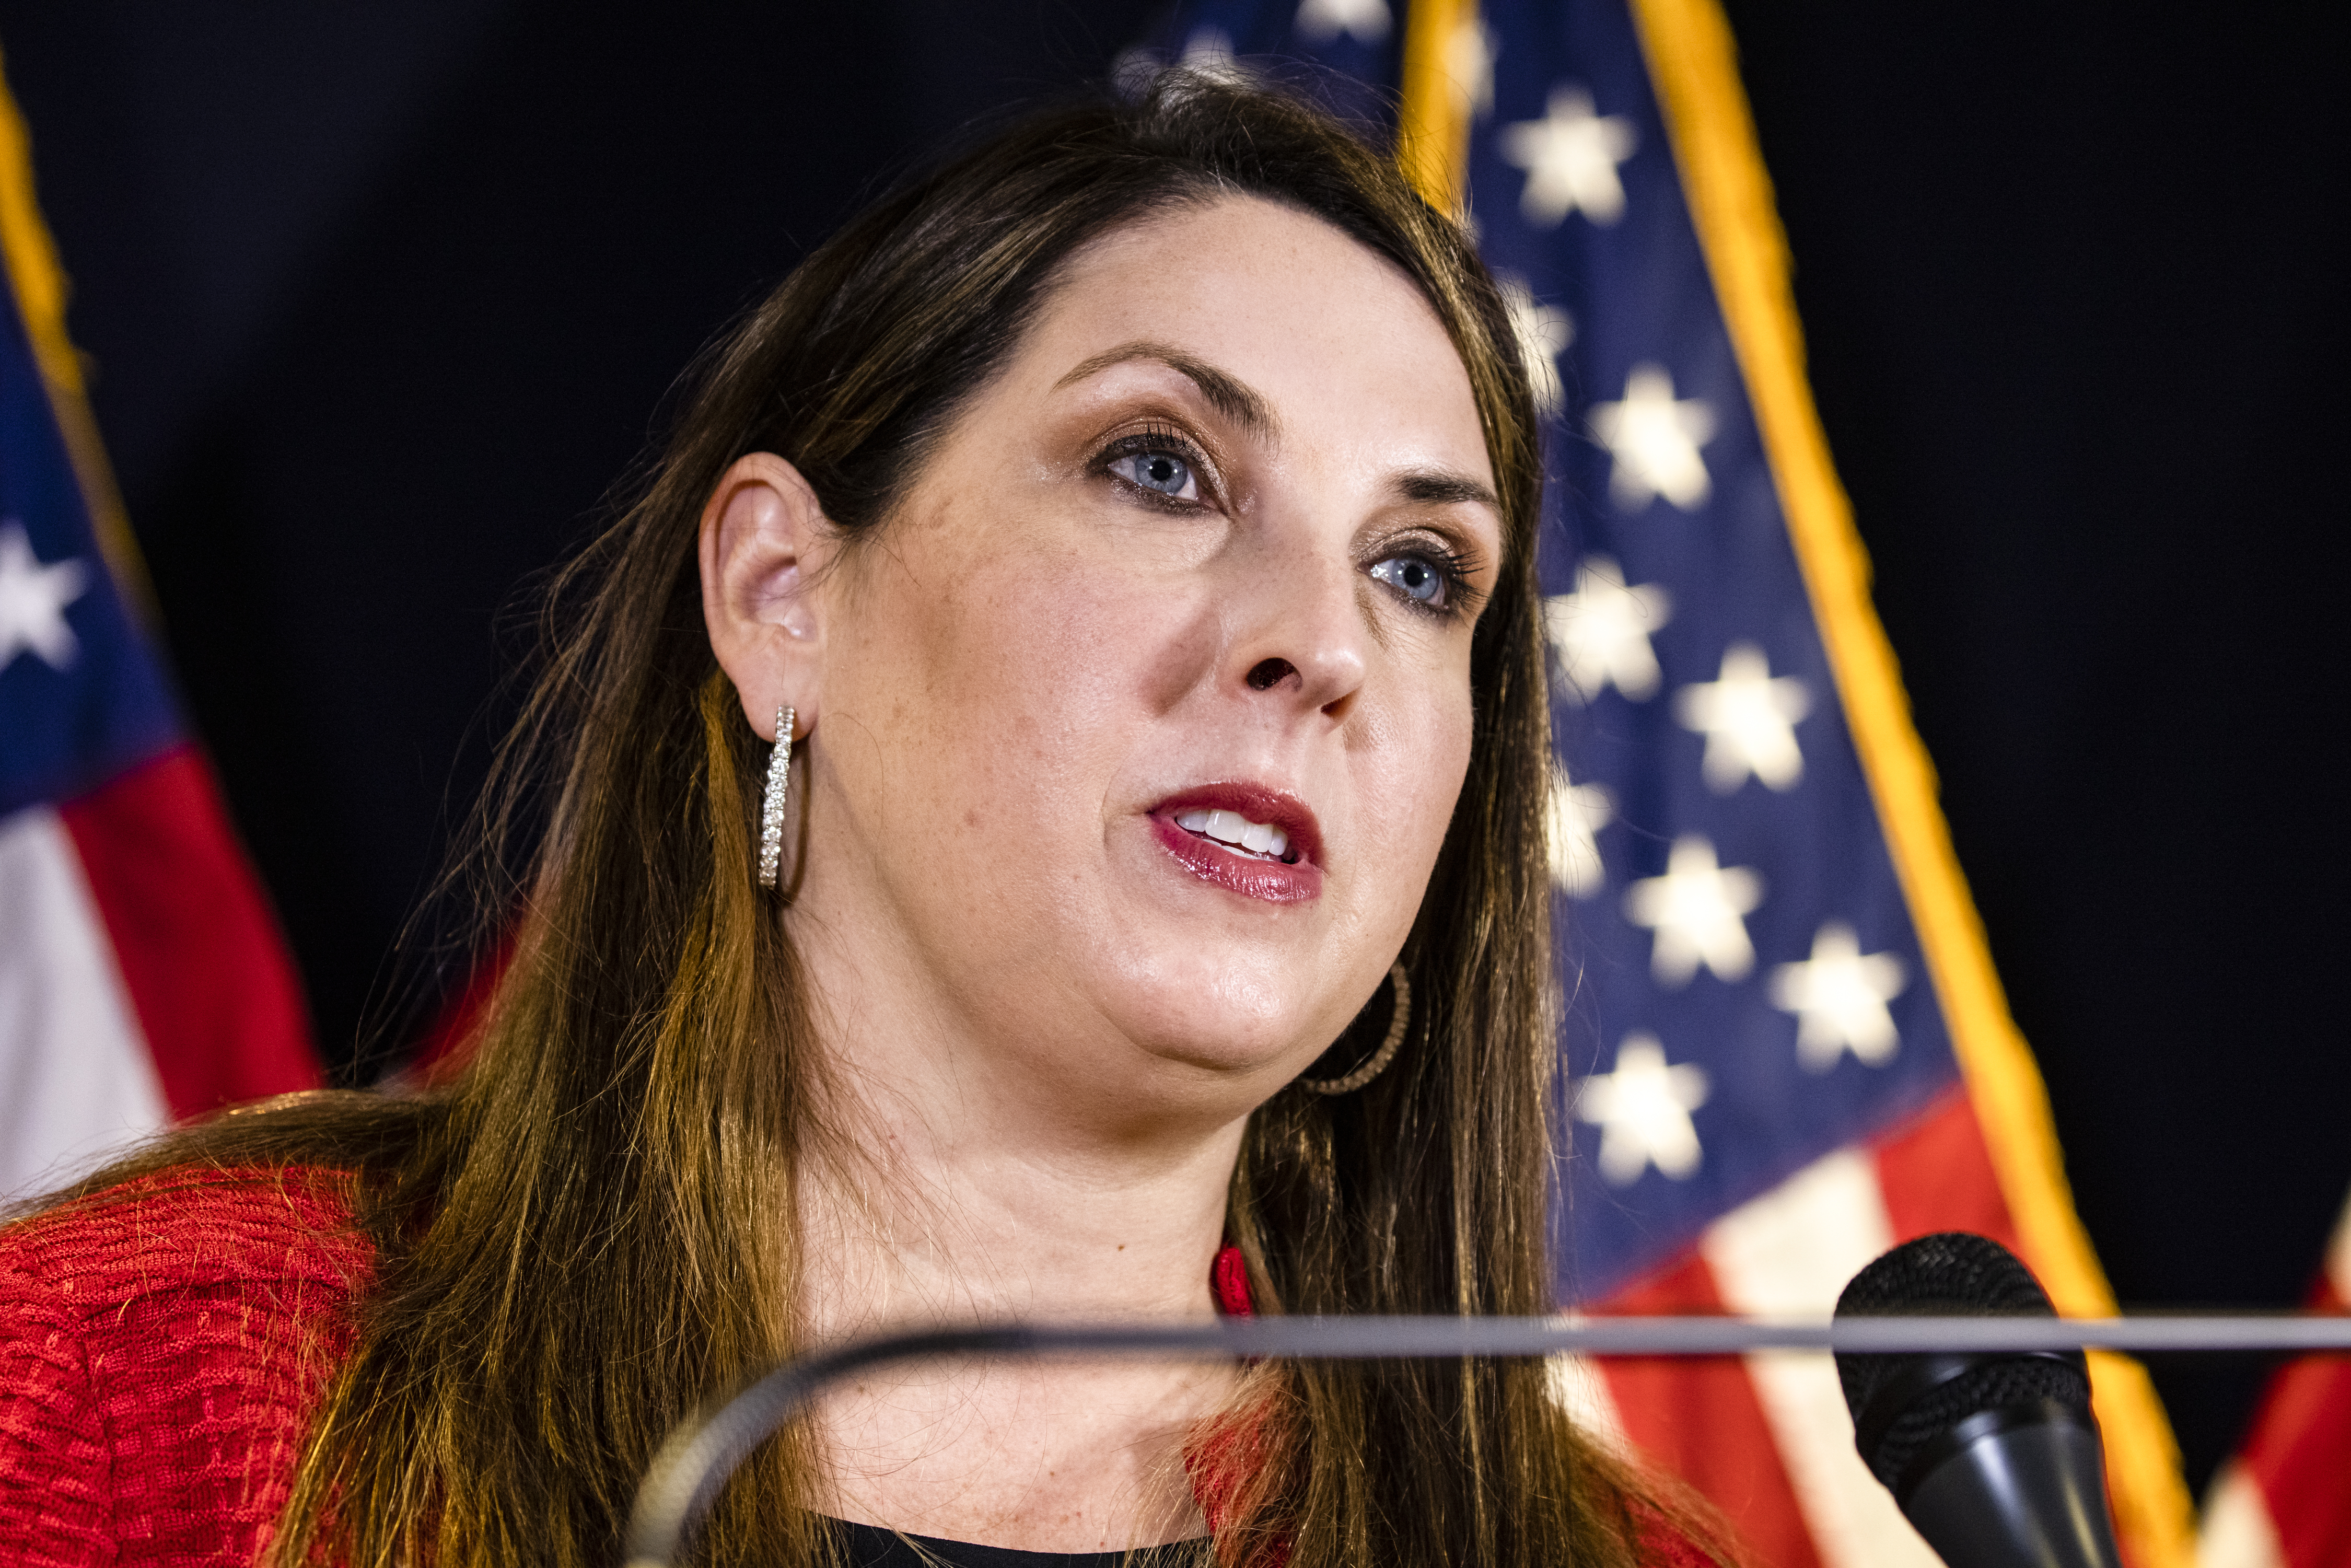 RNC Chair Ronna McDaniel speaks during a press conference at the Republican National Committee headquarters on Nov. 9, 2020 in Washington, D.C.